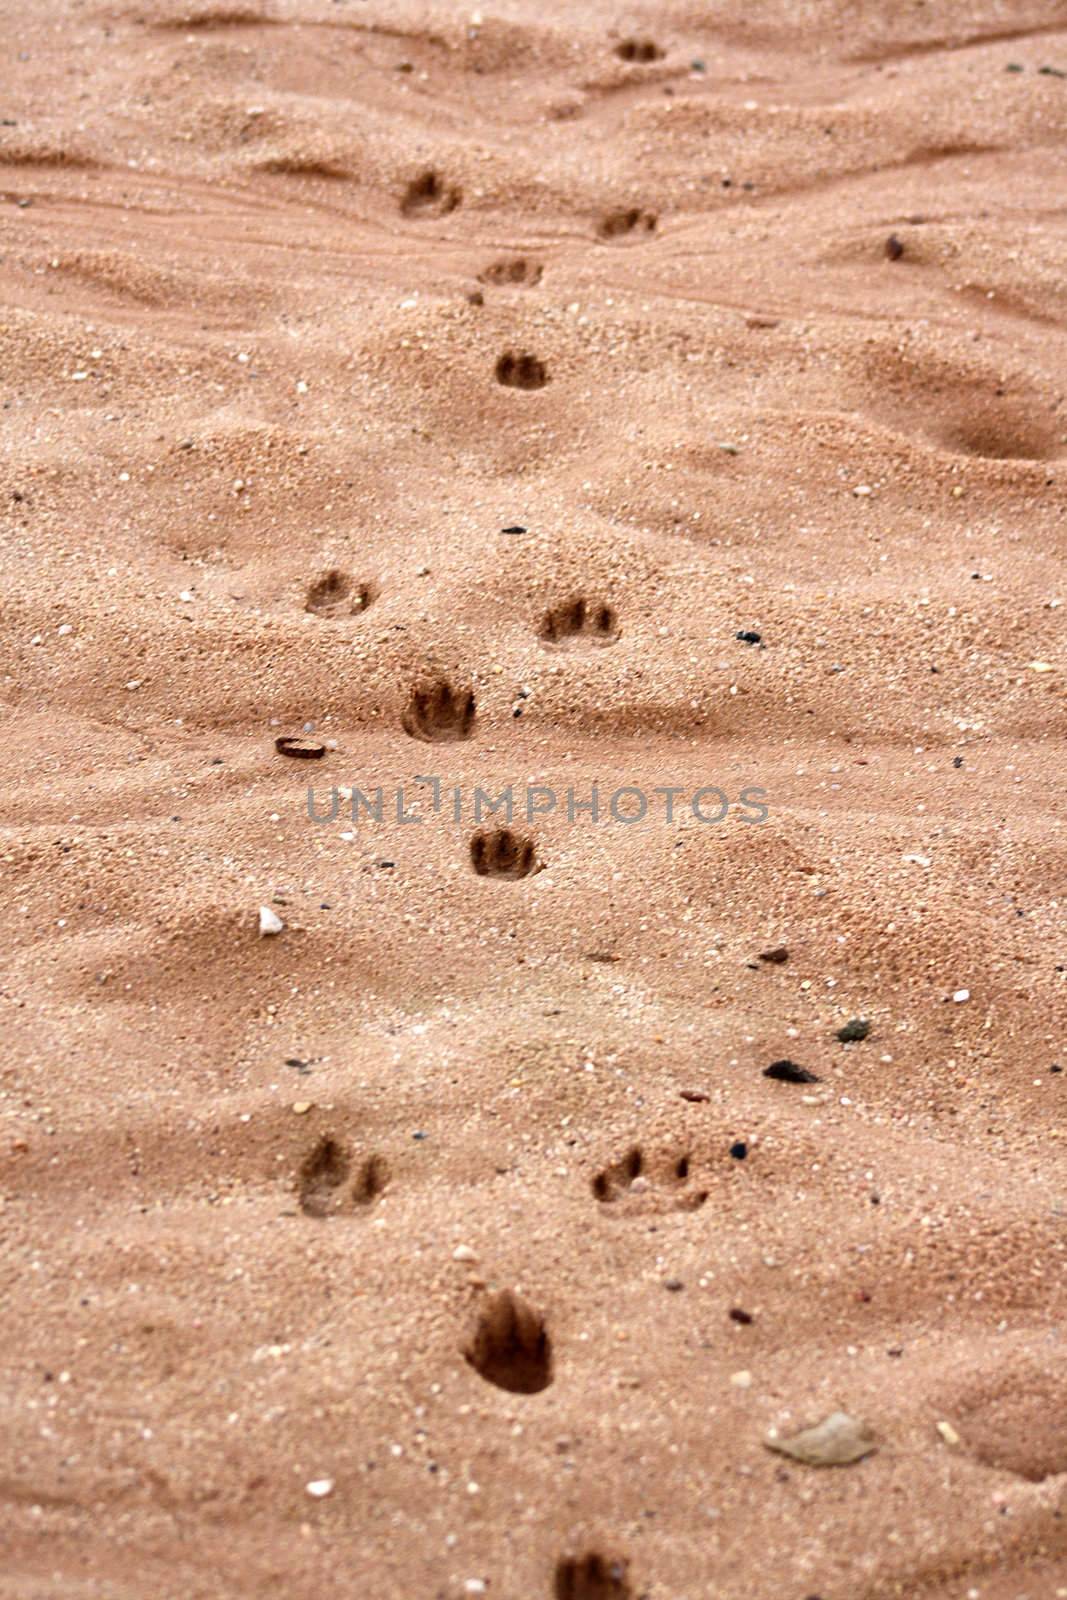 Footprints of animals by photochecker